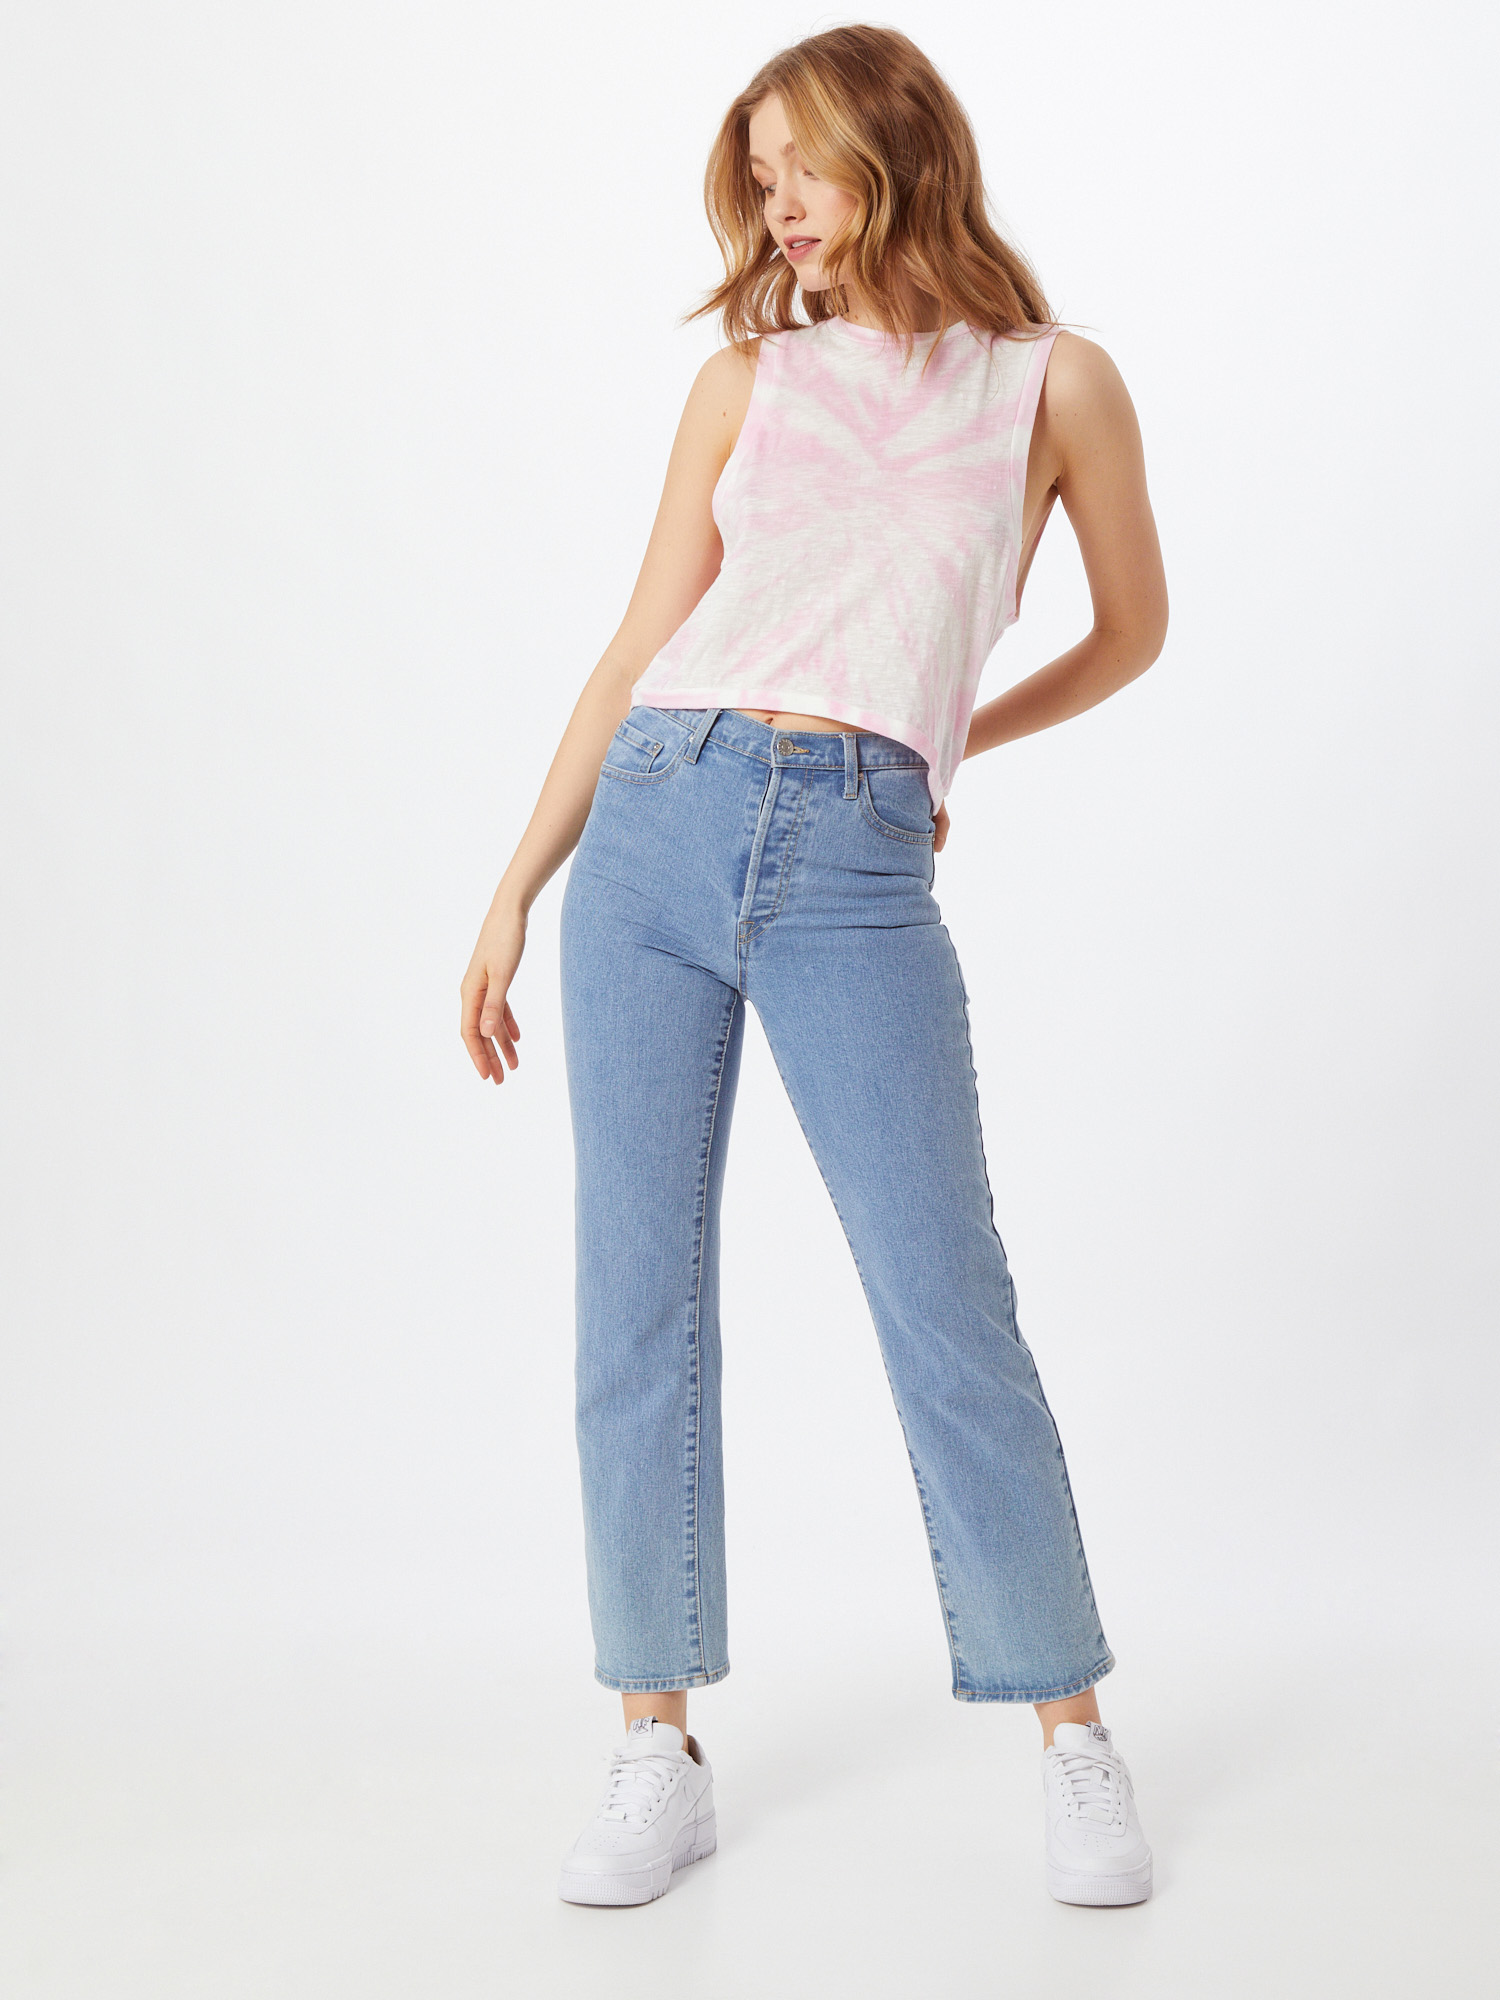 Cotton On Top in Rosa 